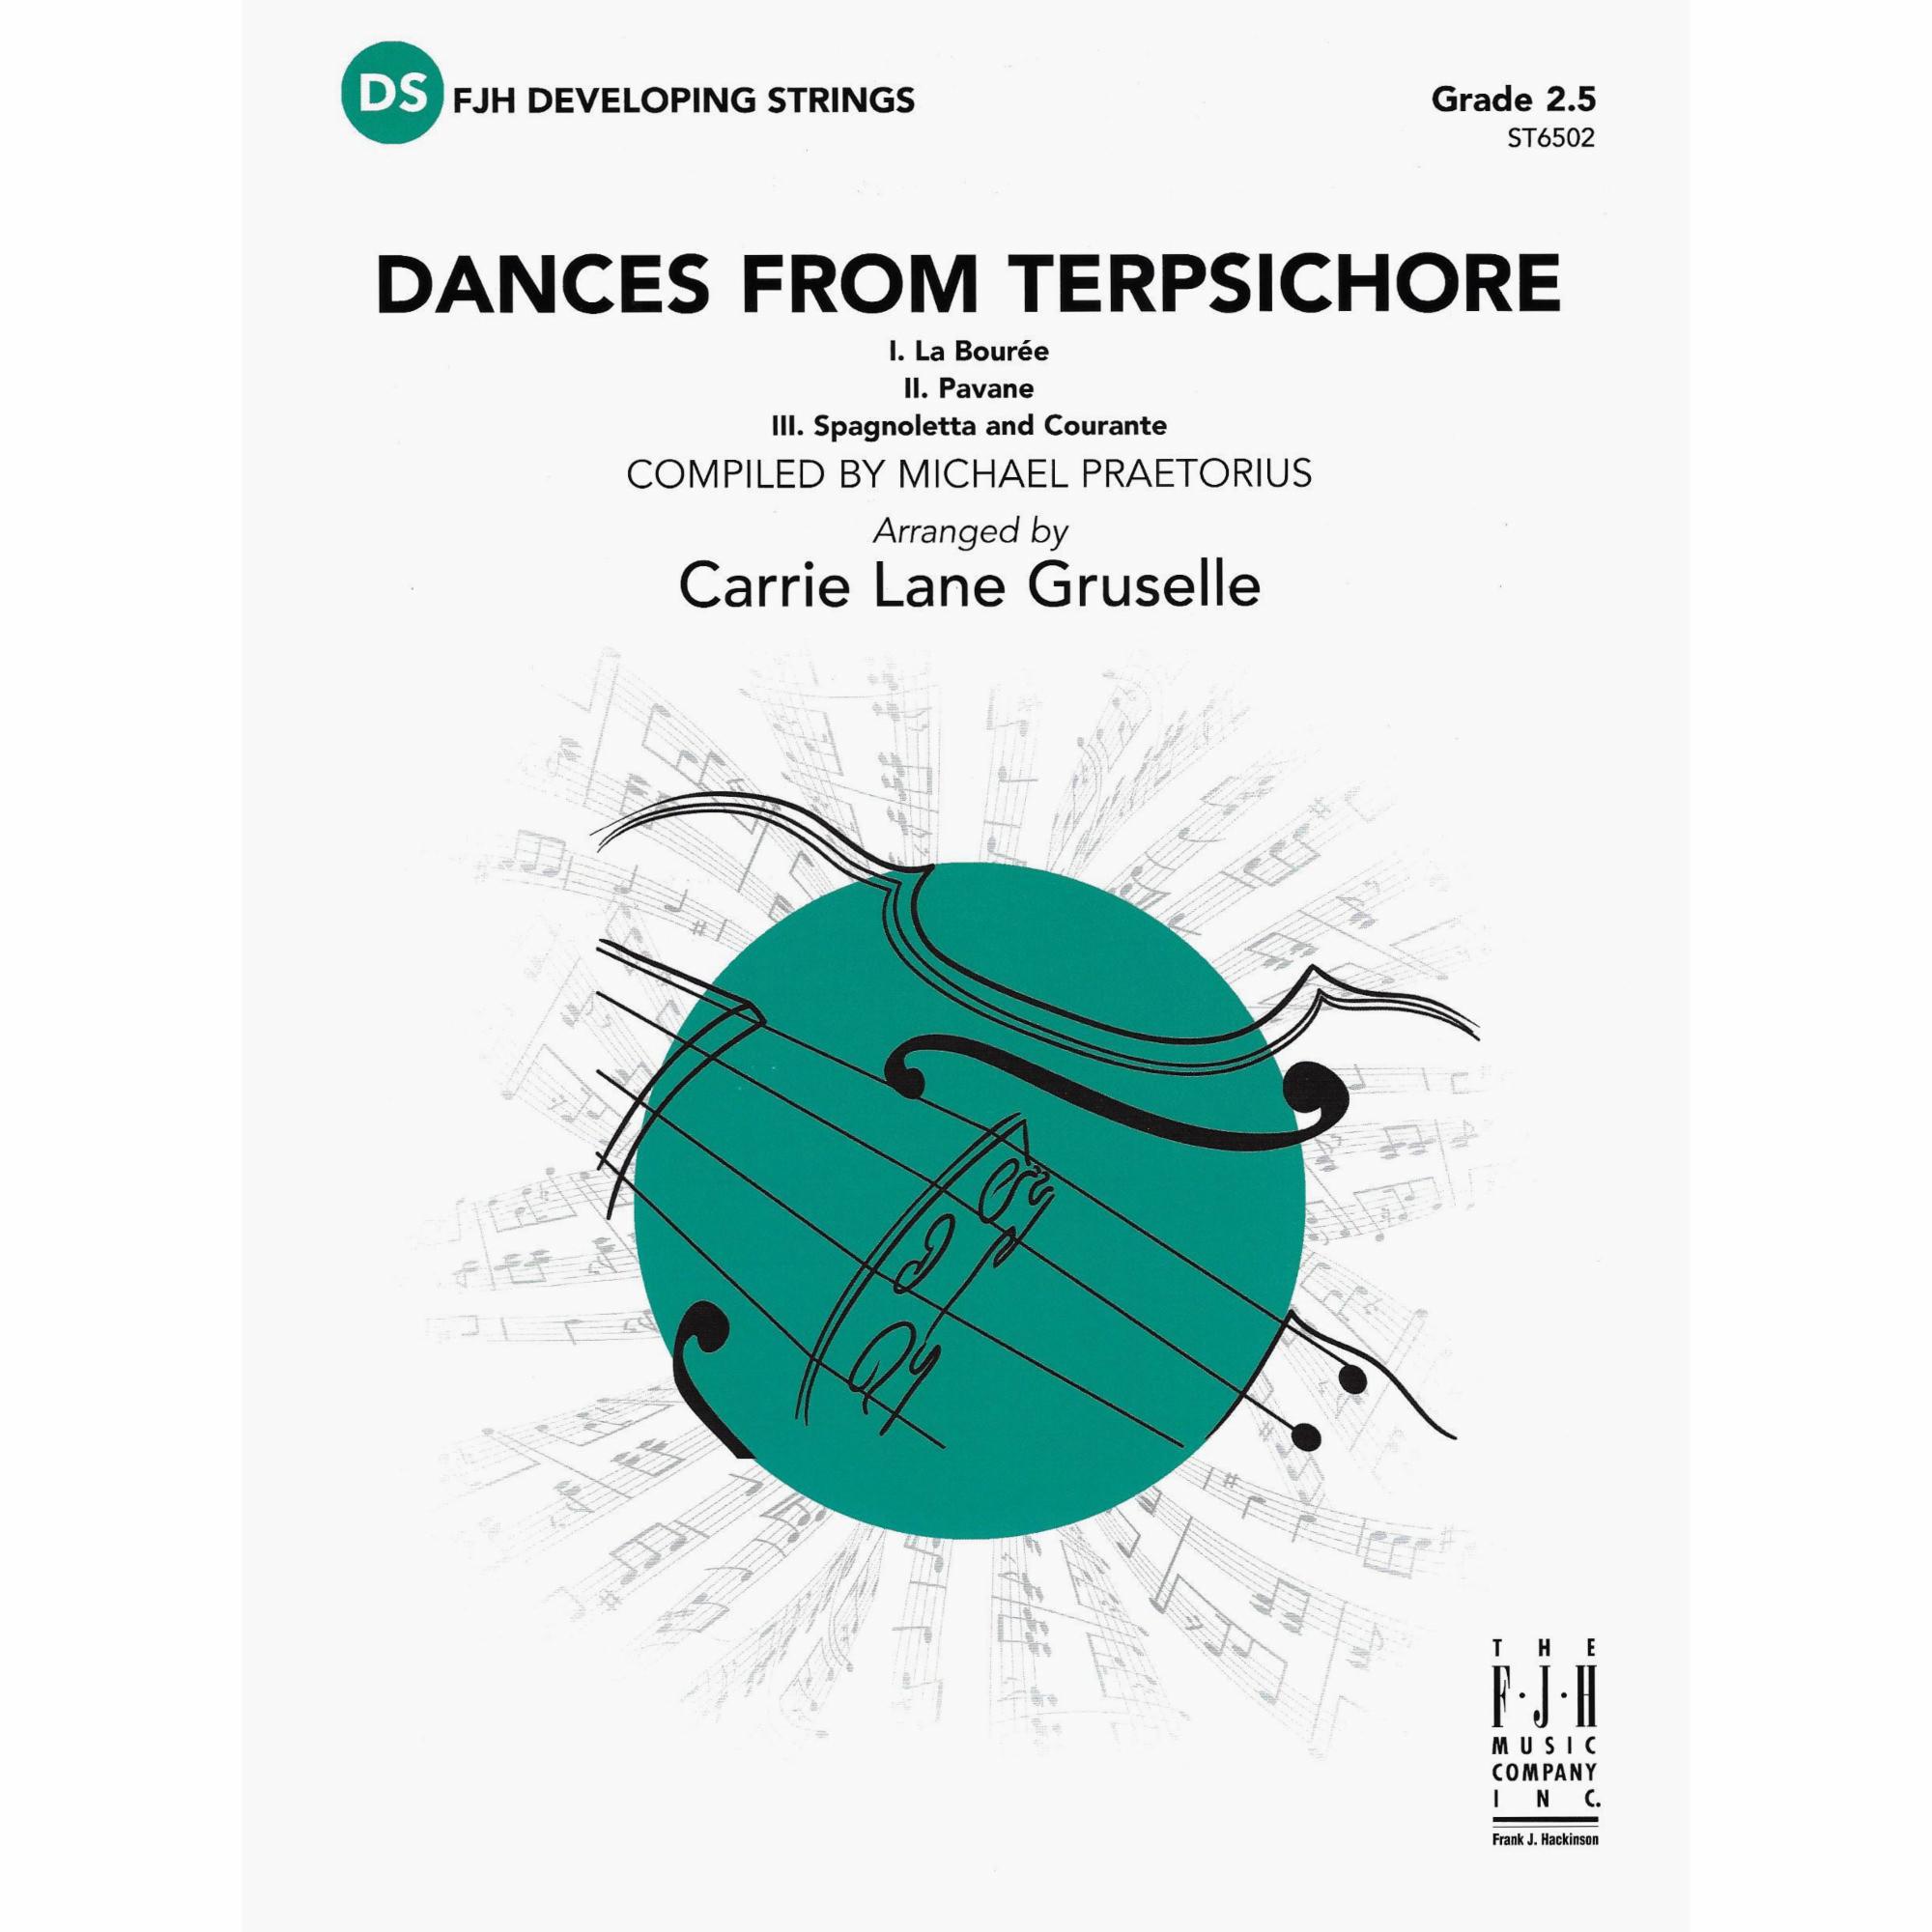 Dances from Terpsichore for String Orchestra